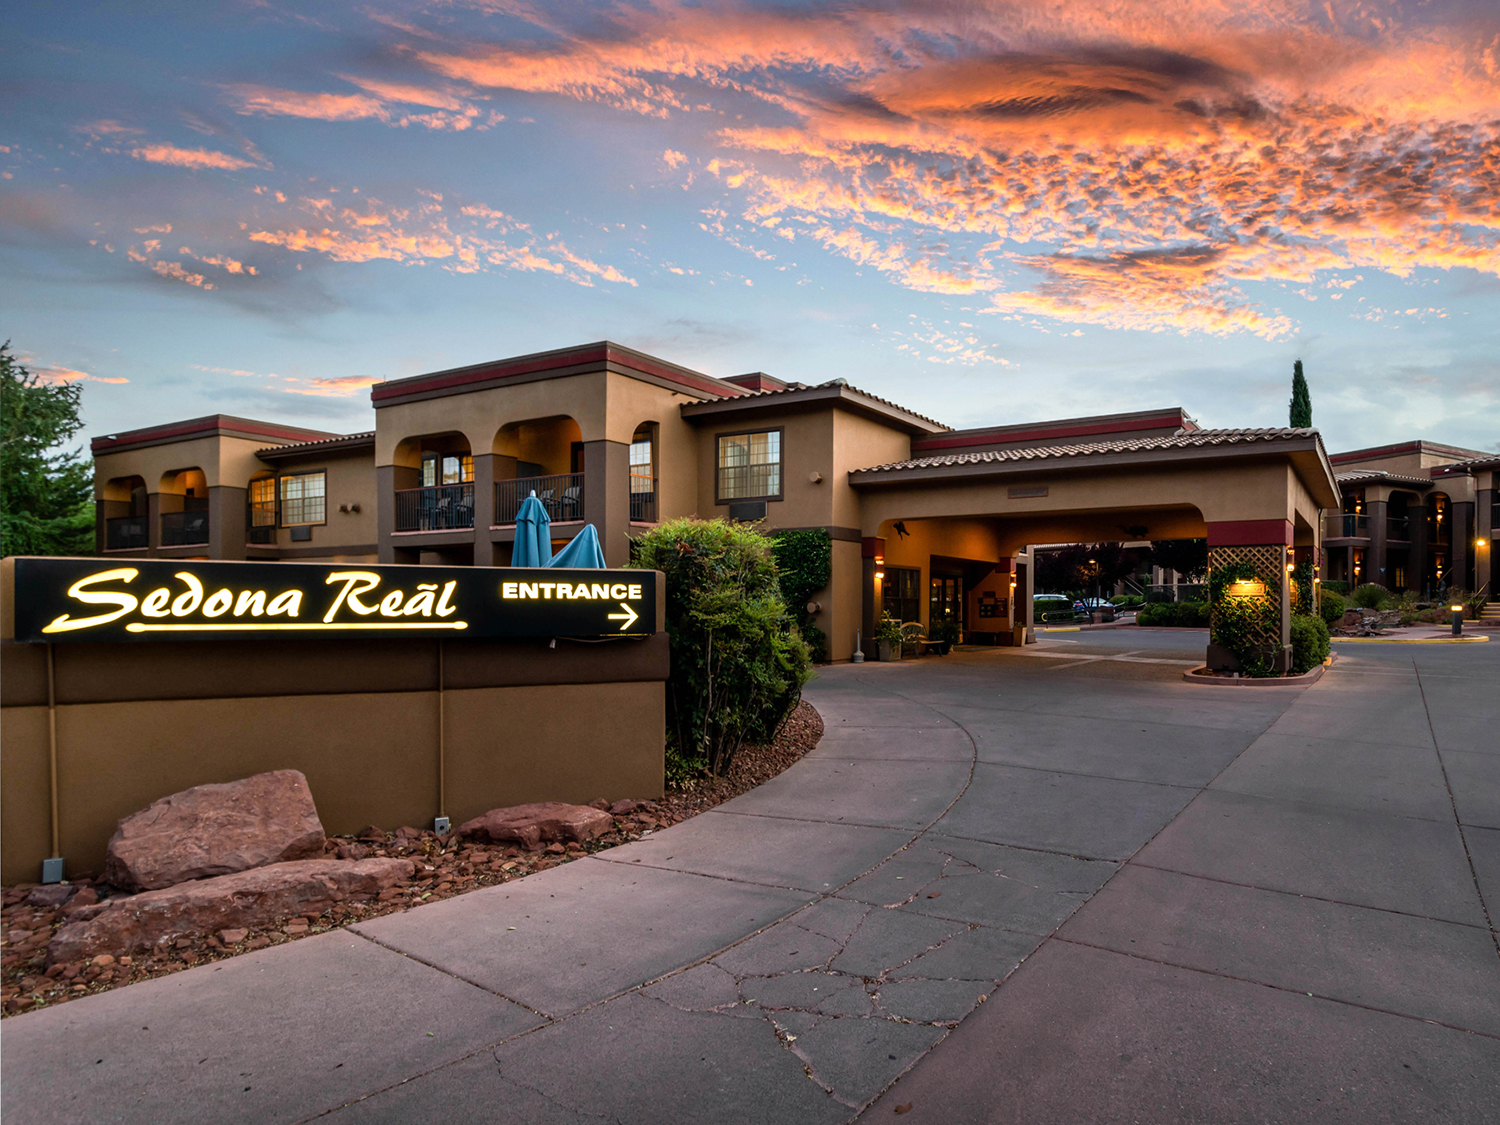 Recent work for the Sedona Chamber of Commerce Property Pro Media